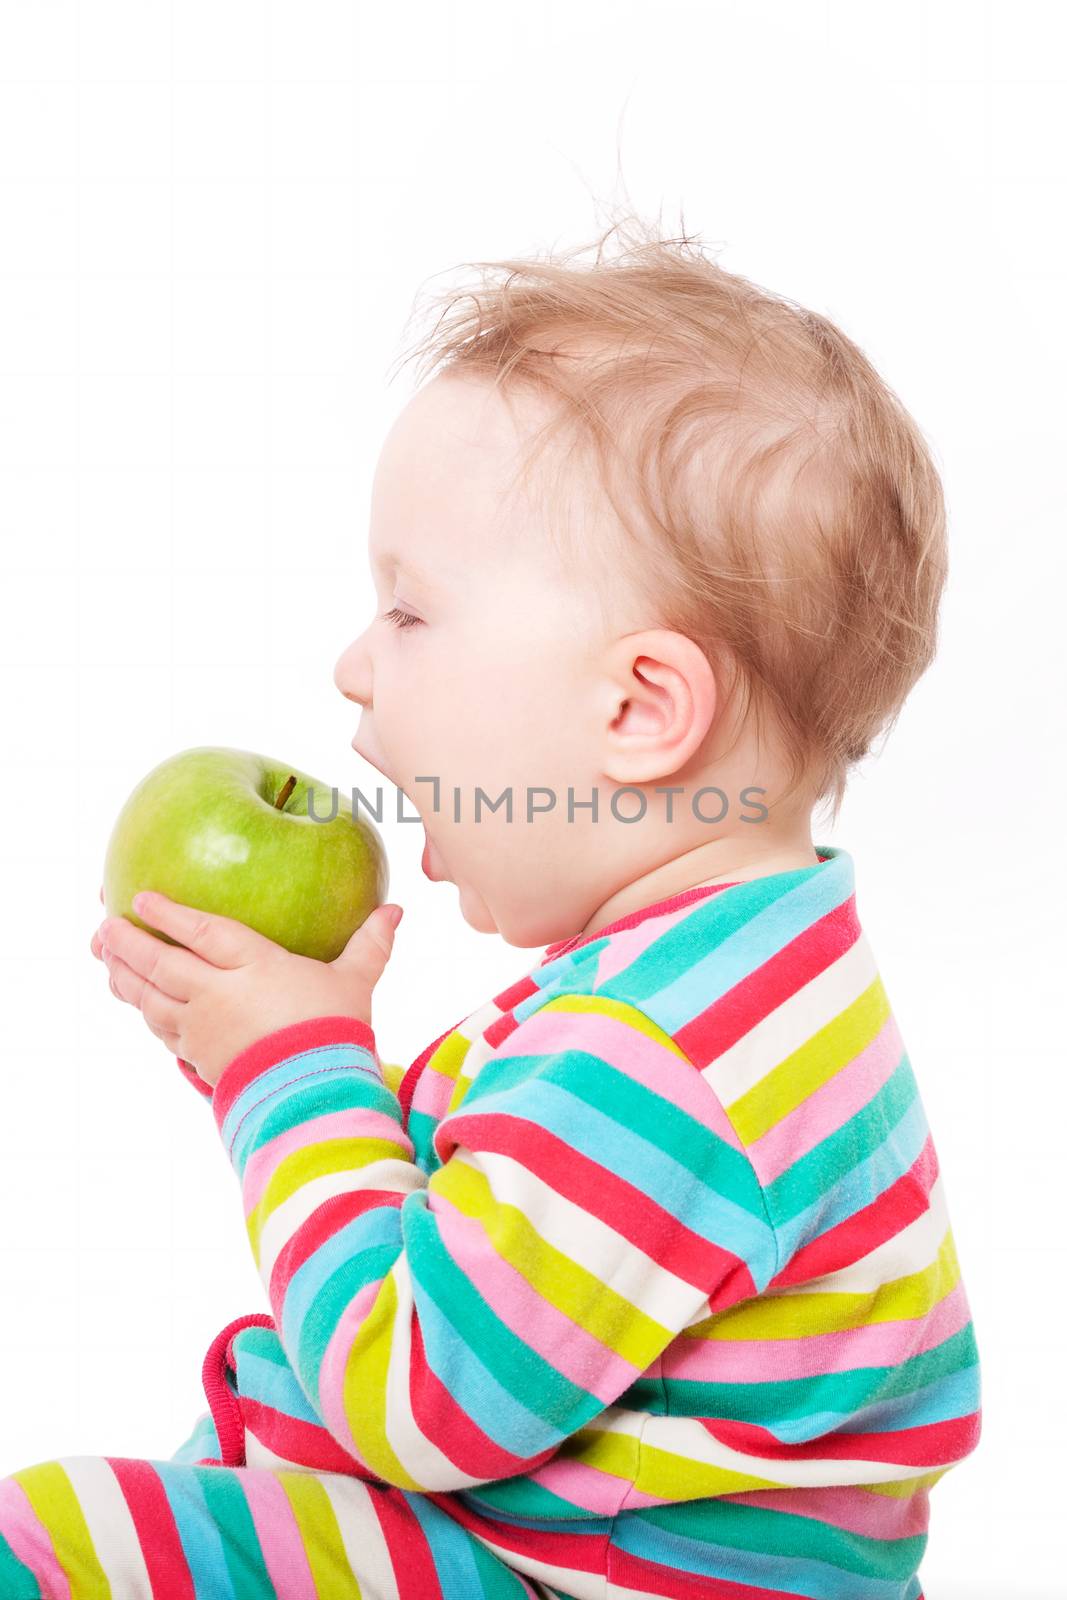 Small cute baby girl in colorful clothing holding and eating green apple isolated on white background. First teeth concept.